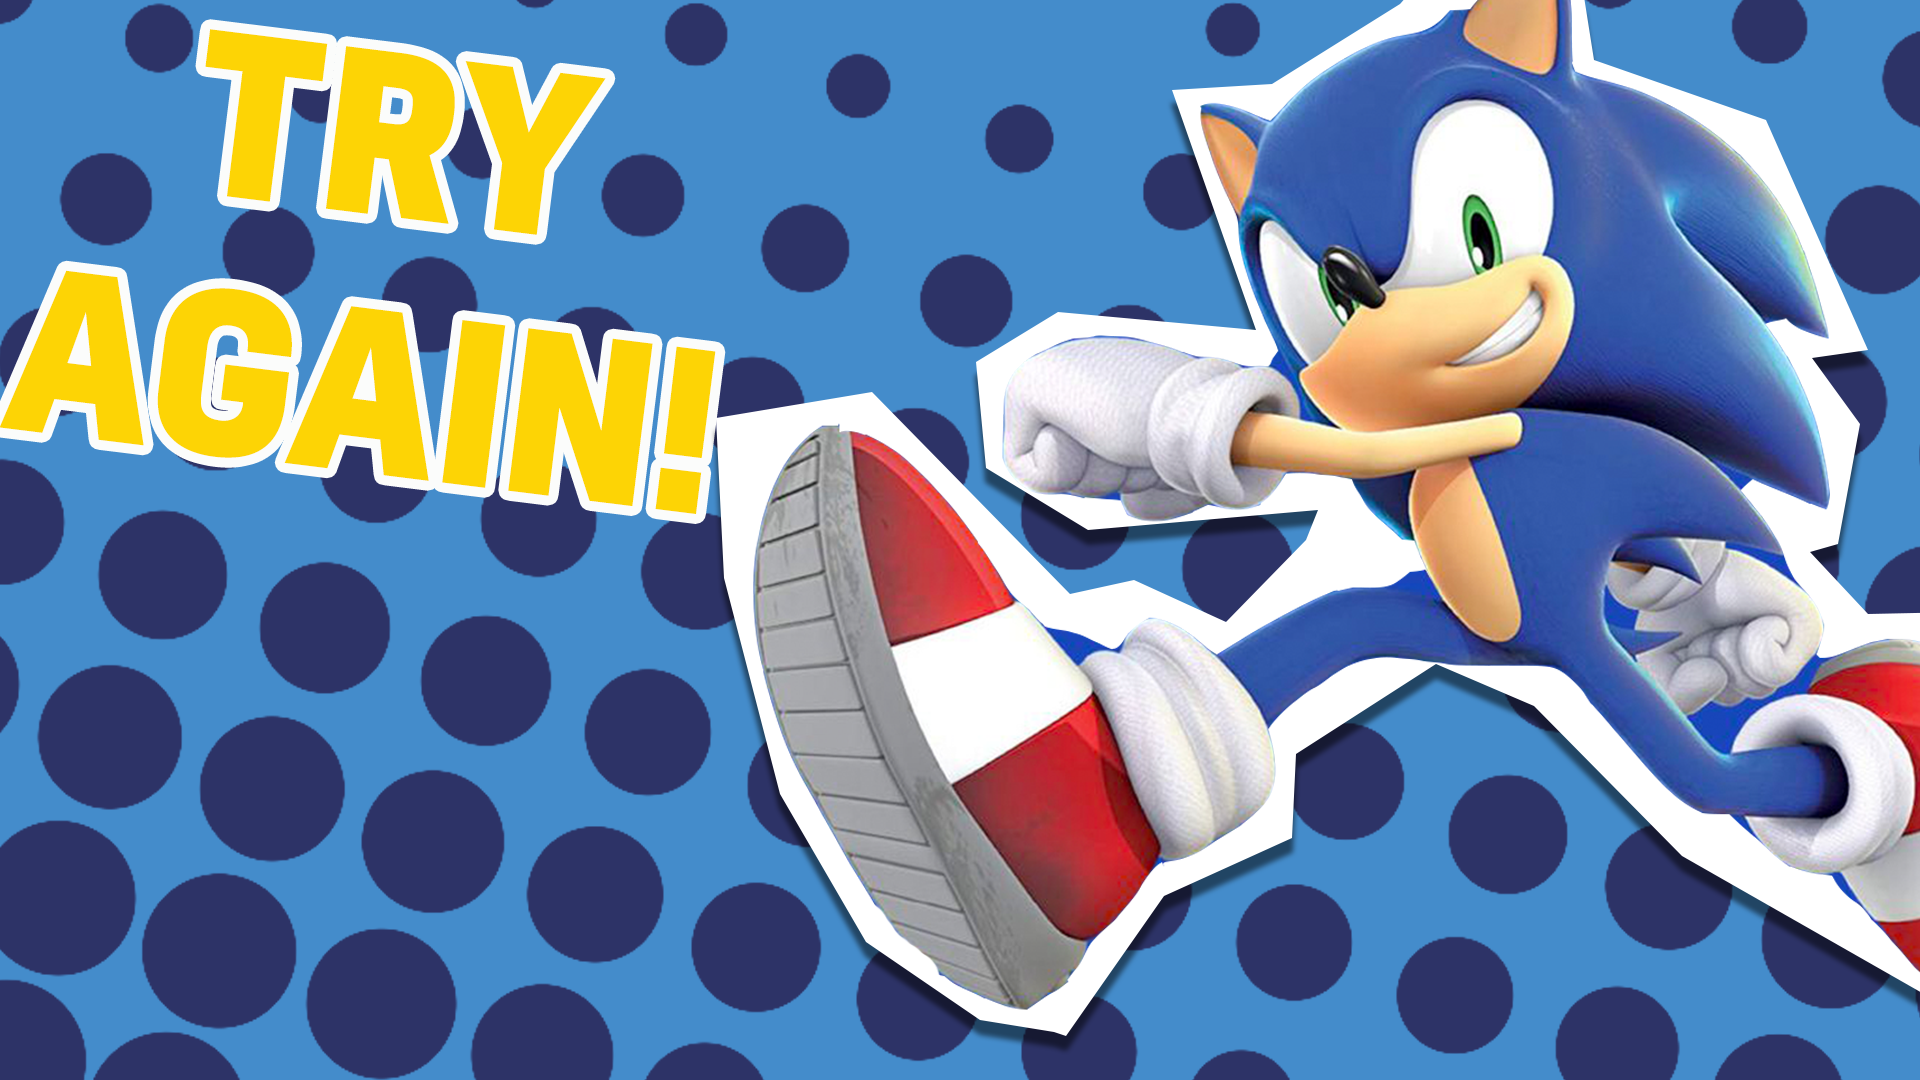 You know a LITTLE bit about Sonic, but not enough to ace this quiz! Try again!